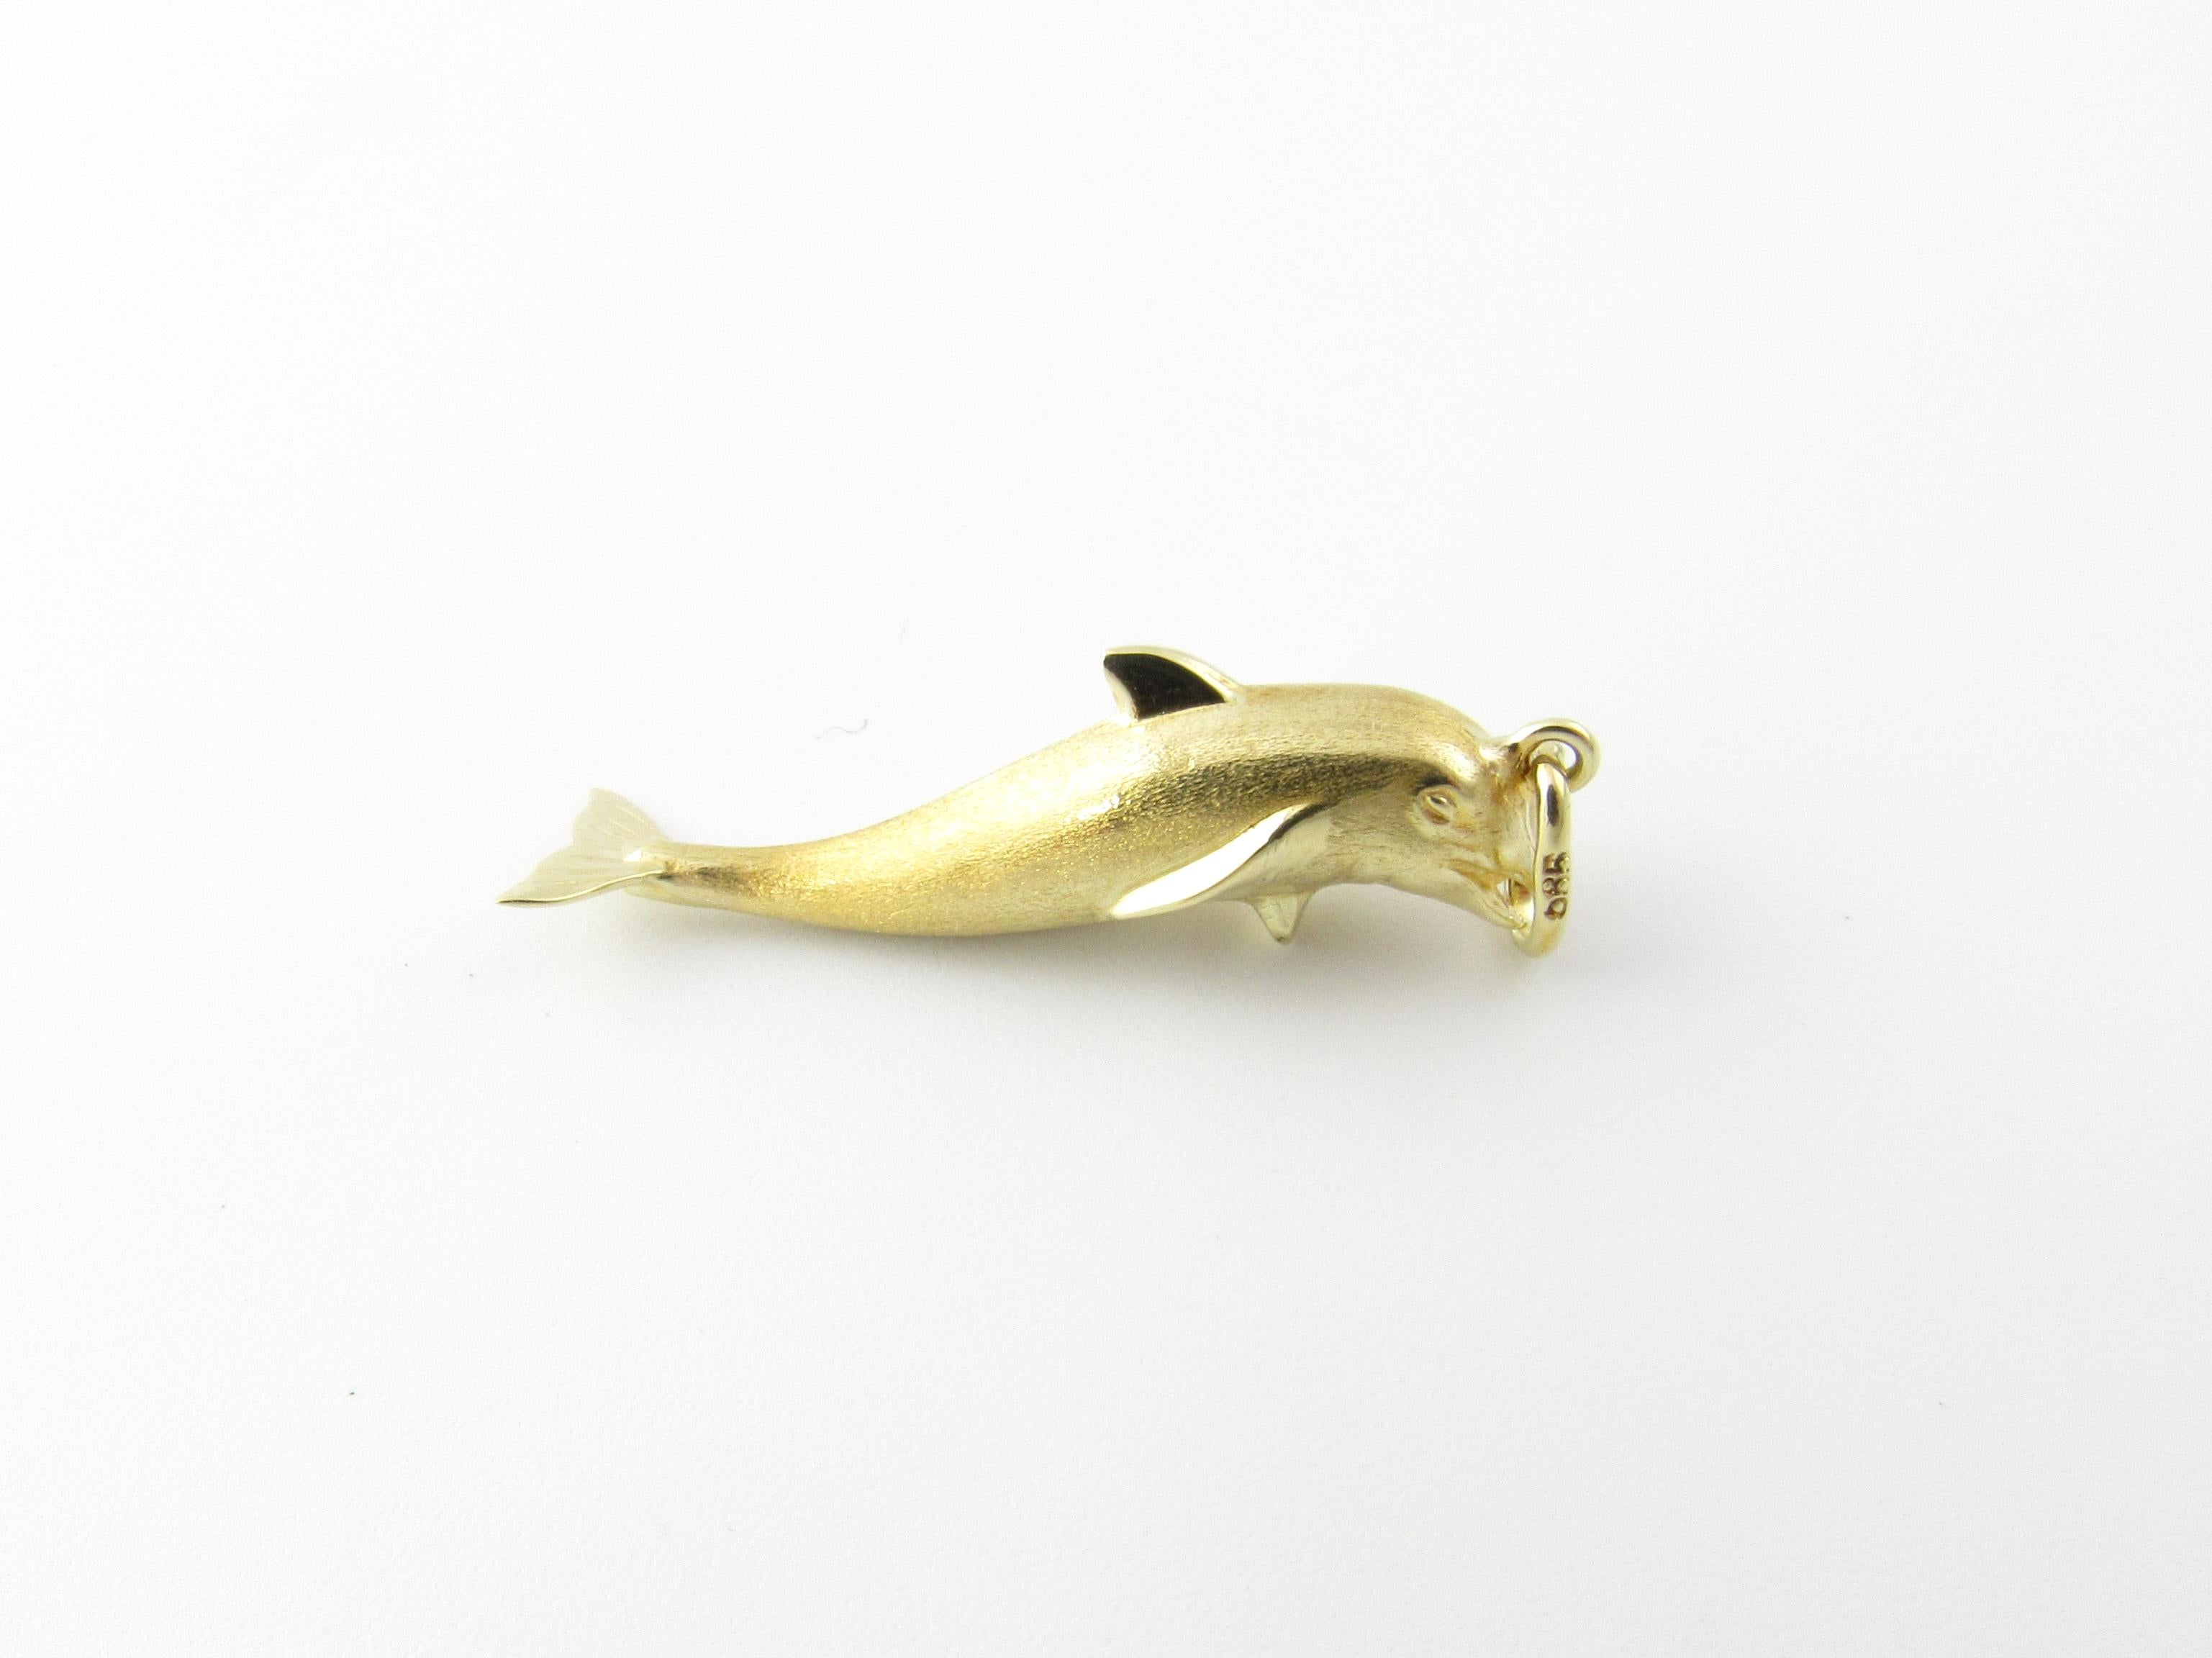 Vintage 14 Karat Yellow Gold Dolphin Charm

Dolphins have been a symbol of protection and good luck since ancient times.

This lovely 3D charm features a beautiful dolphin crafted in meticulously detailed 14K yellow gold.

Size: 29 mm x 9 mm (actual